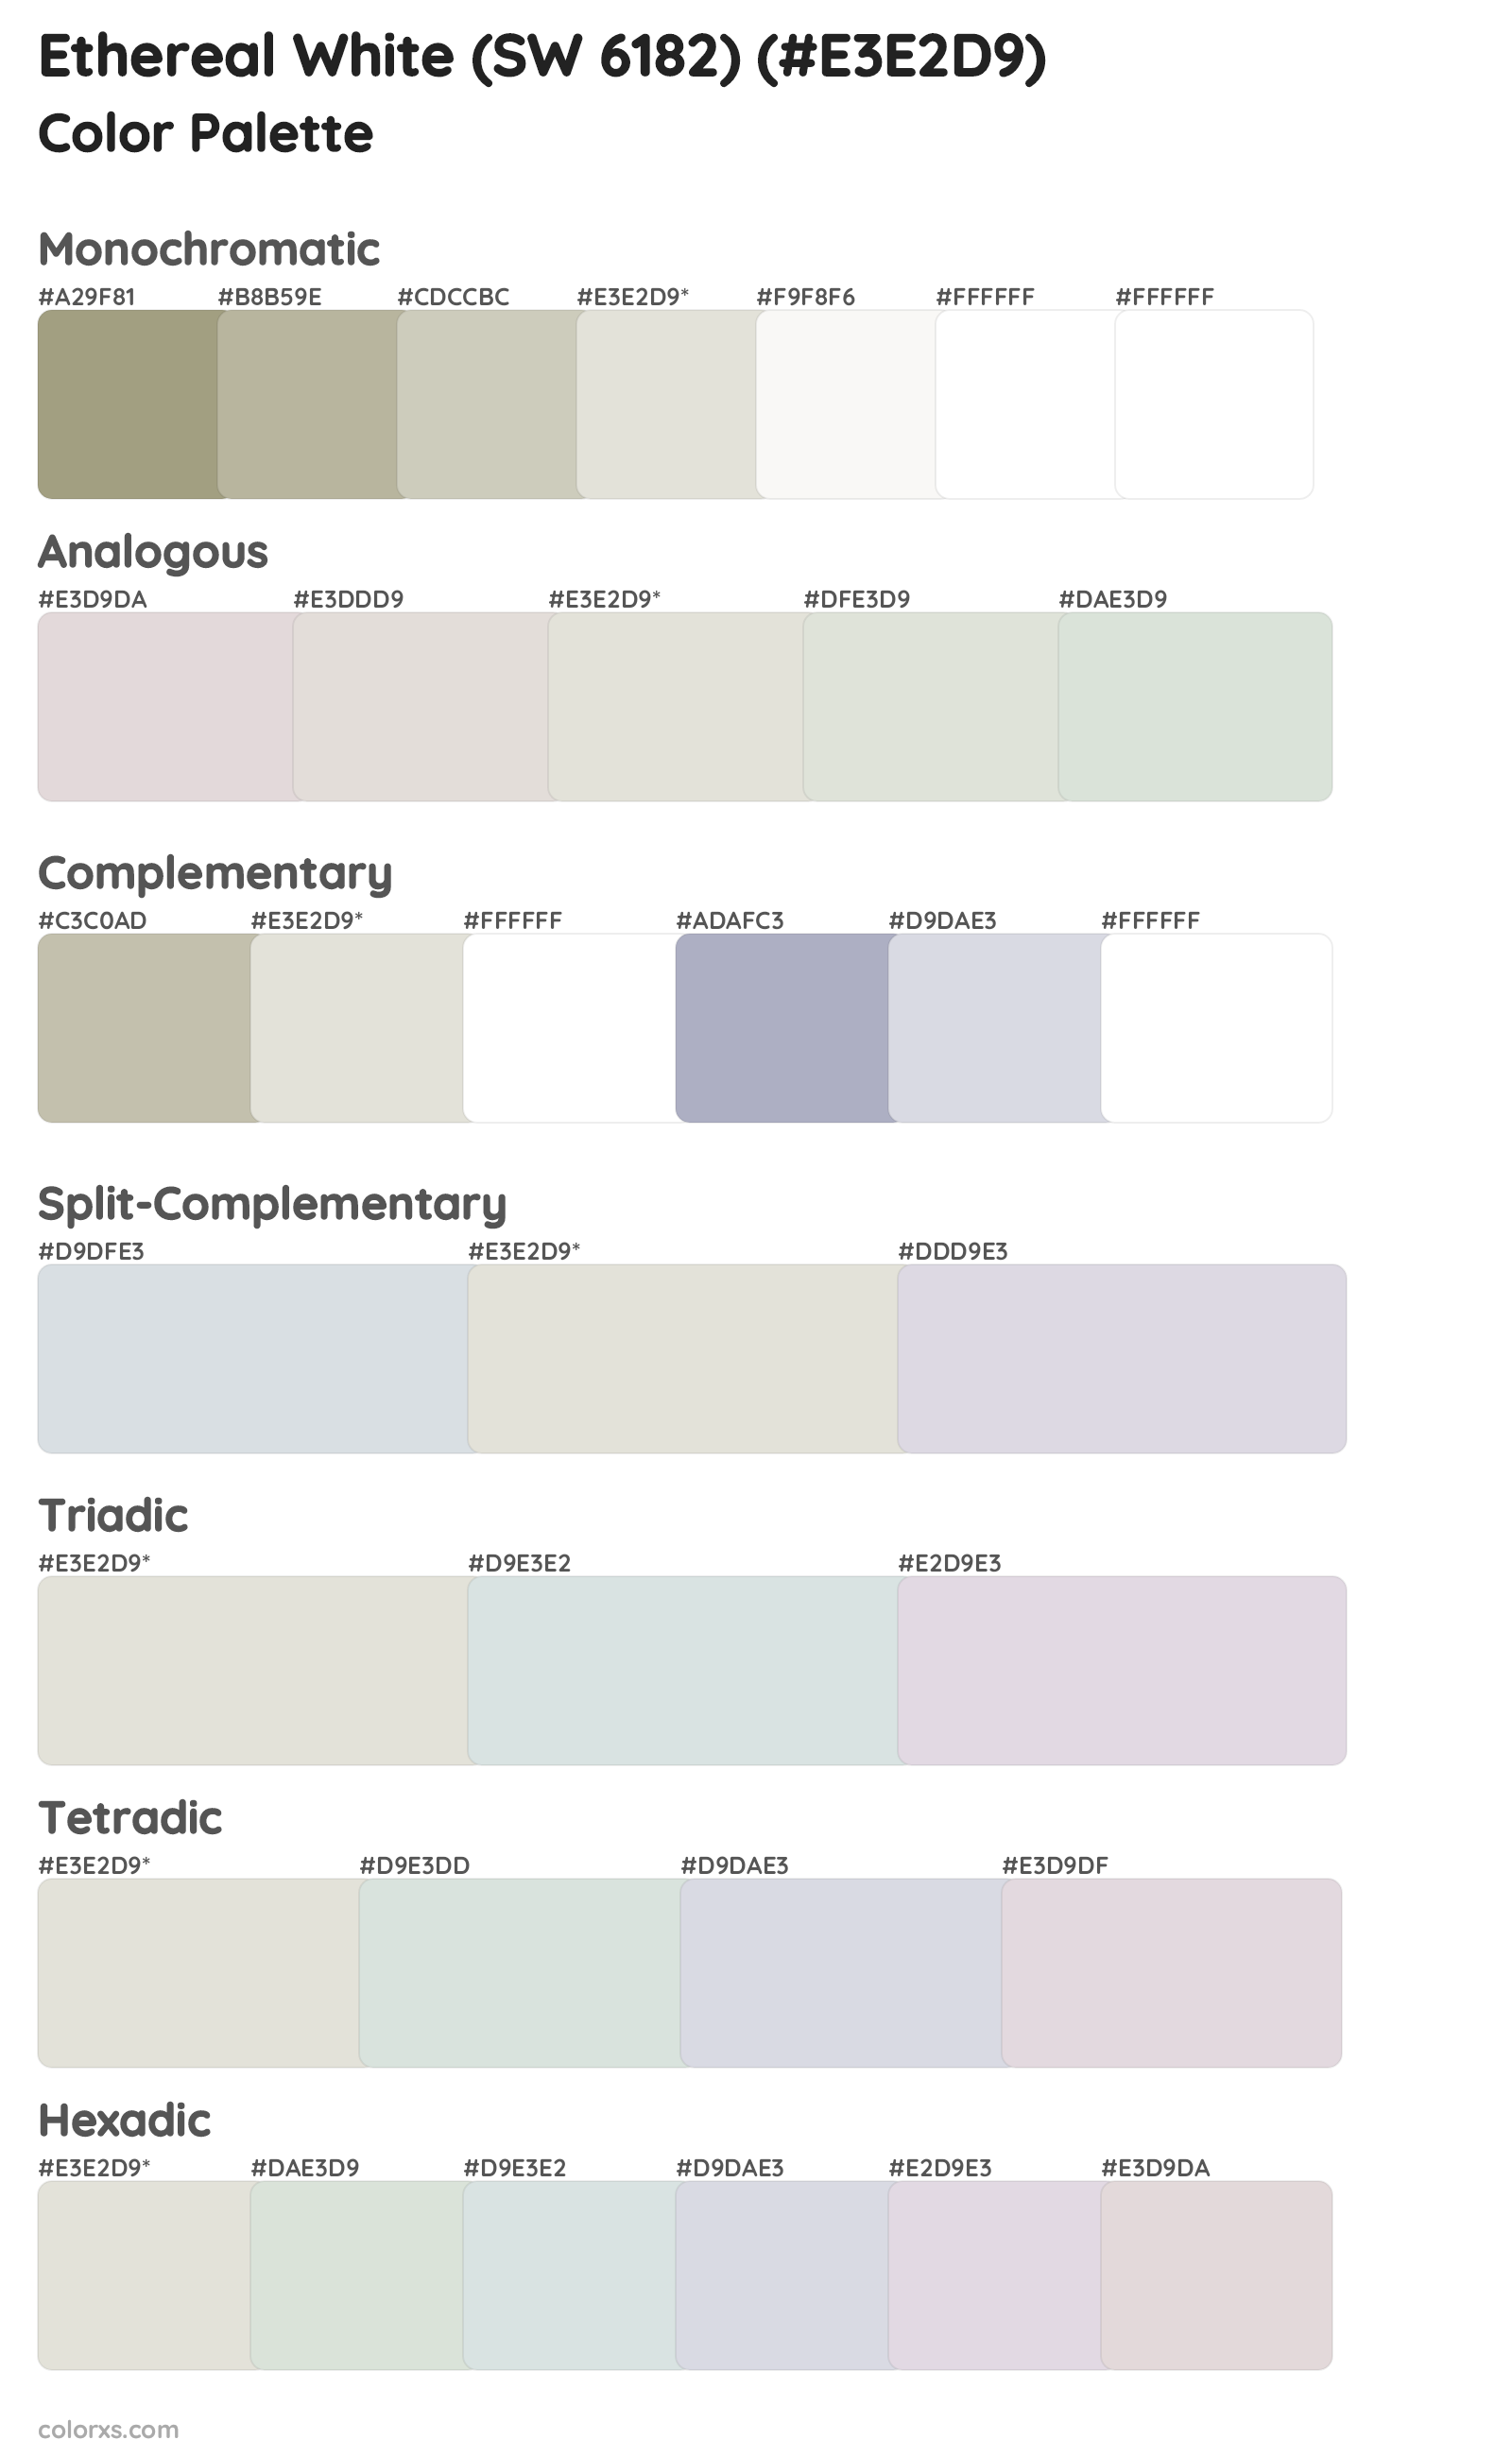 Ethereal White (SW 6182) Color Scheme Palettes